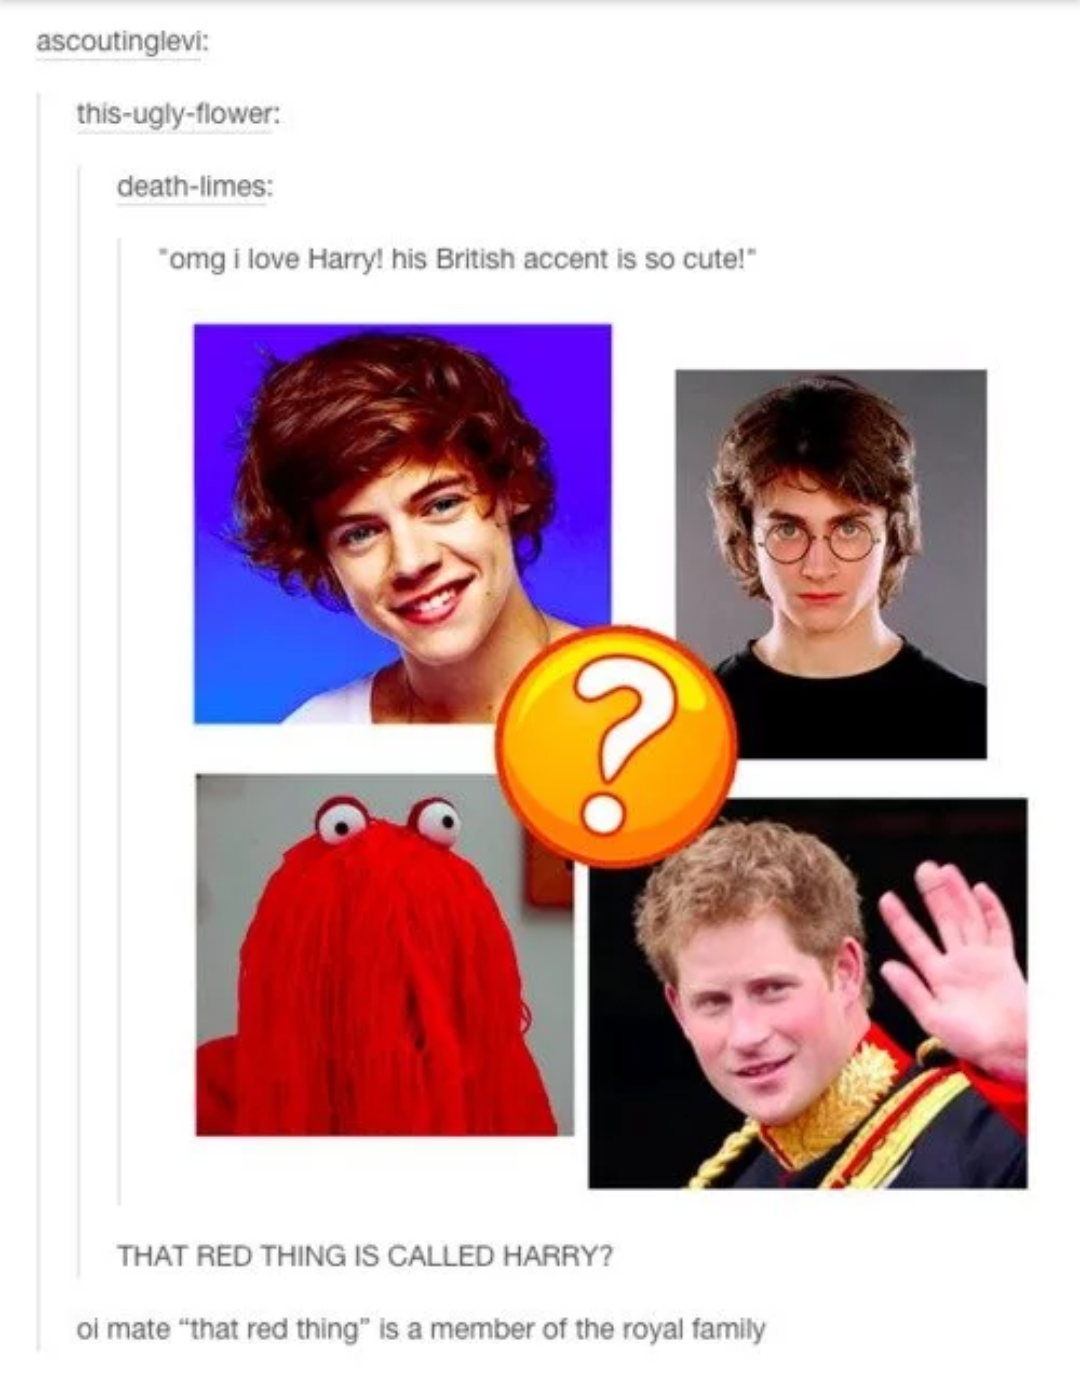 Prince "red thing" Harry